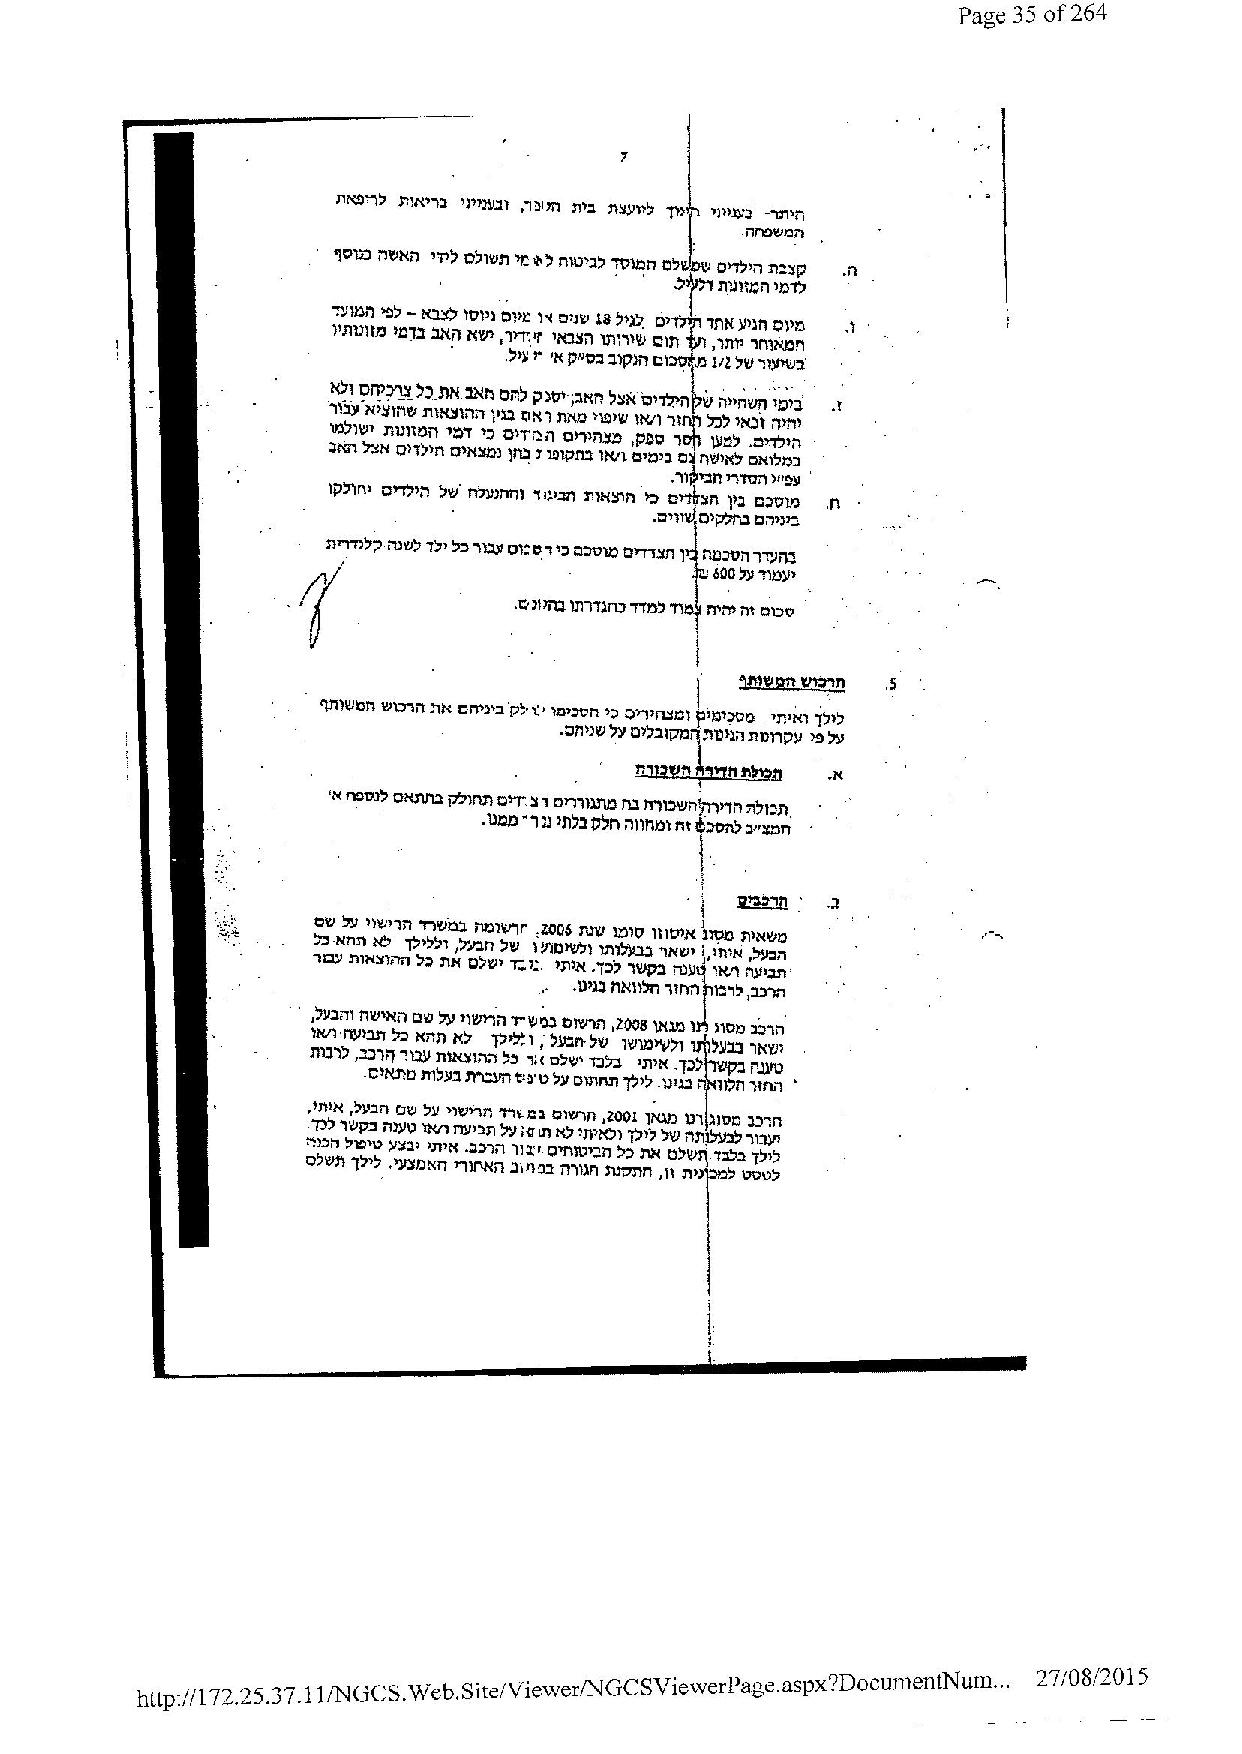 document-page-035